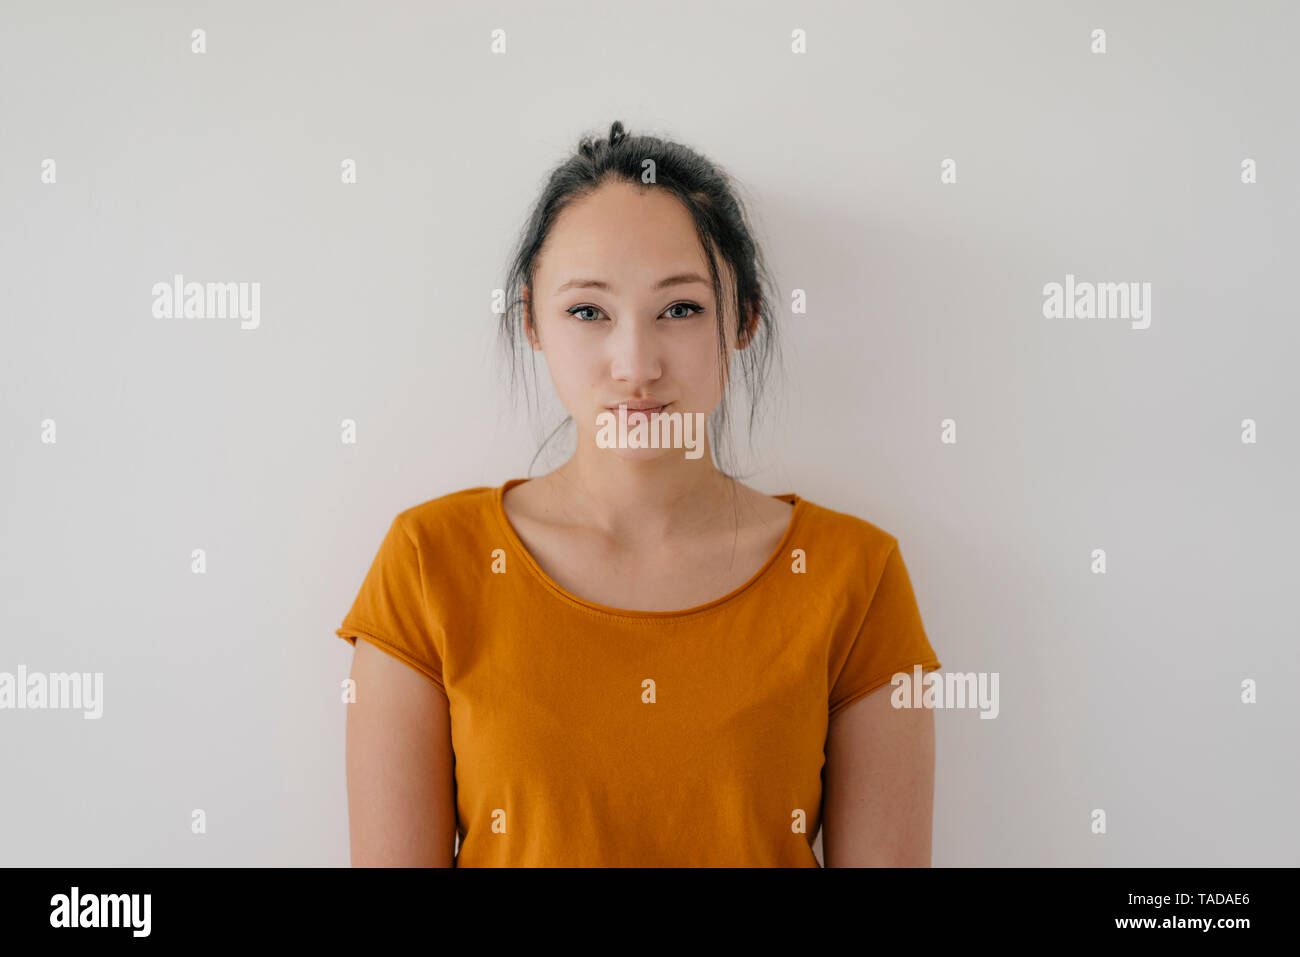 Portrait of a young woman wearing yellow t-shirt Stock Photo